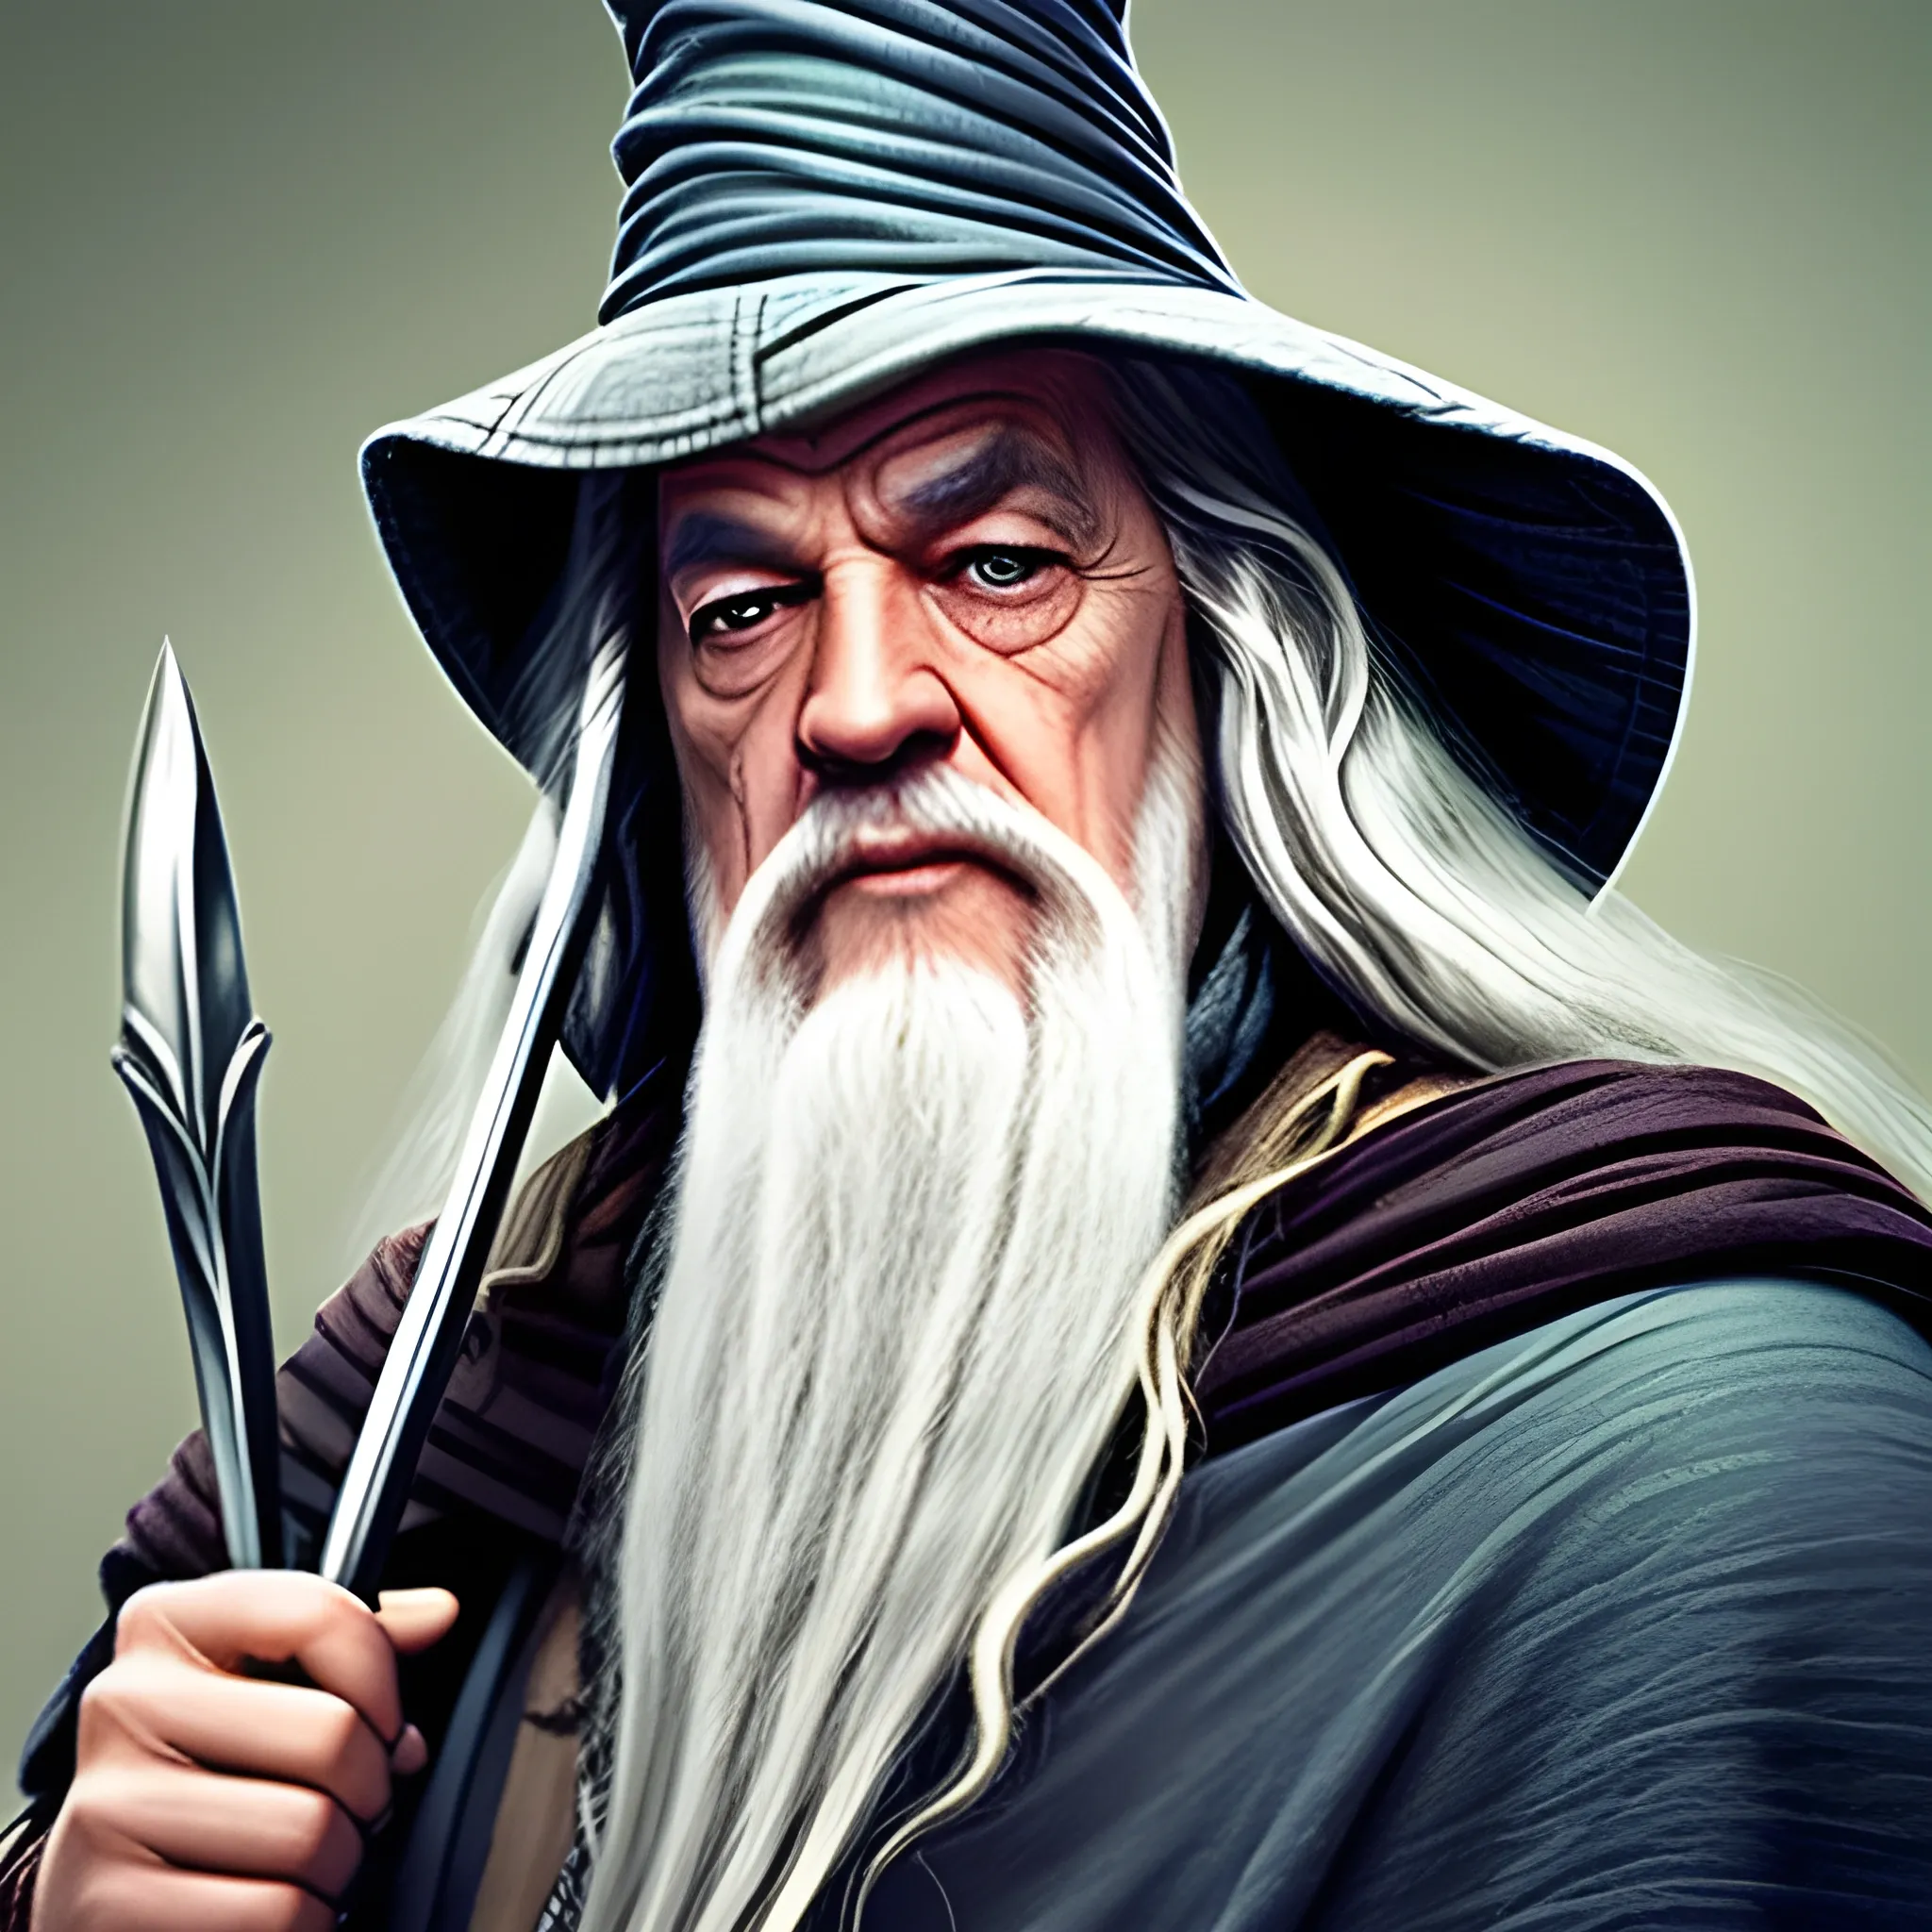 Give me Gandalf from lord of the rings but chad
